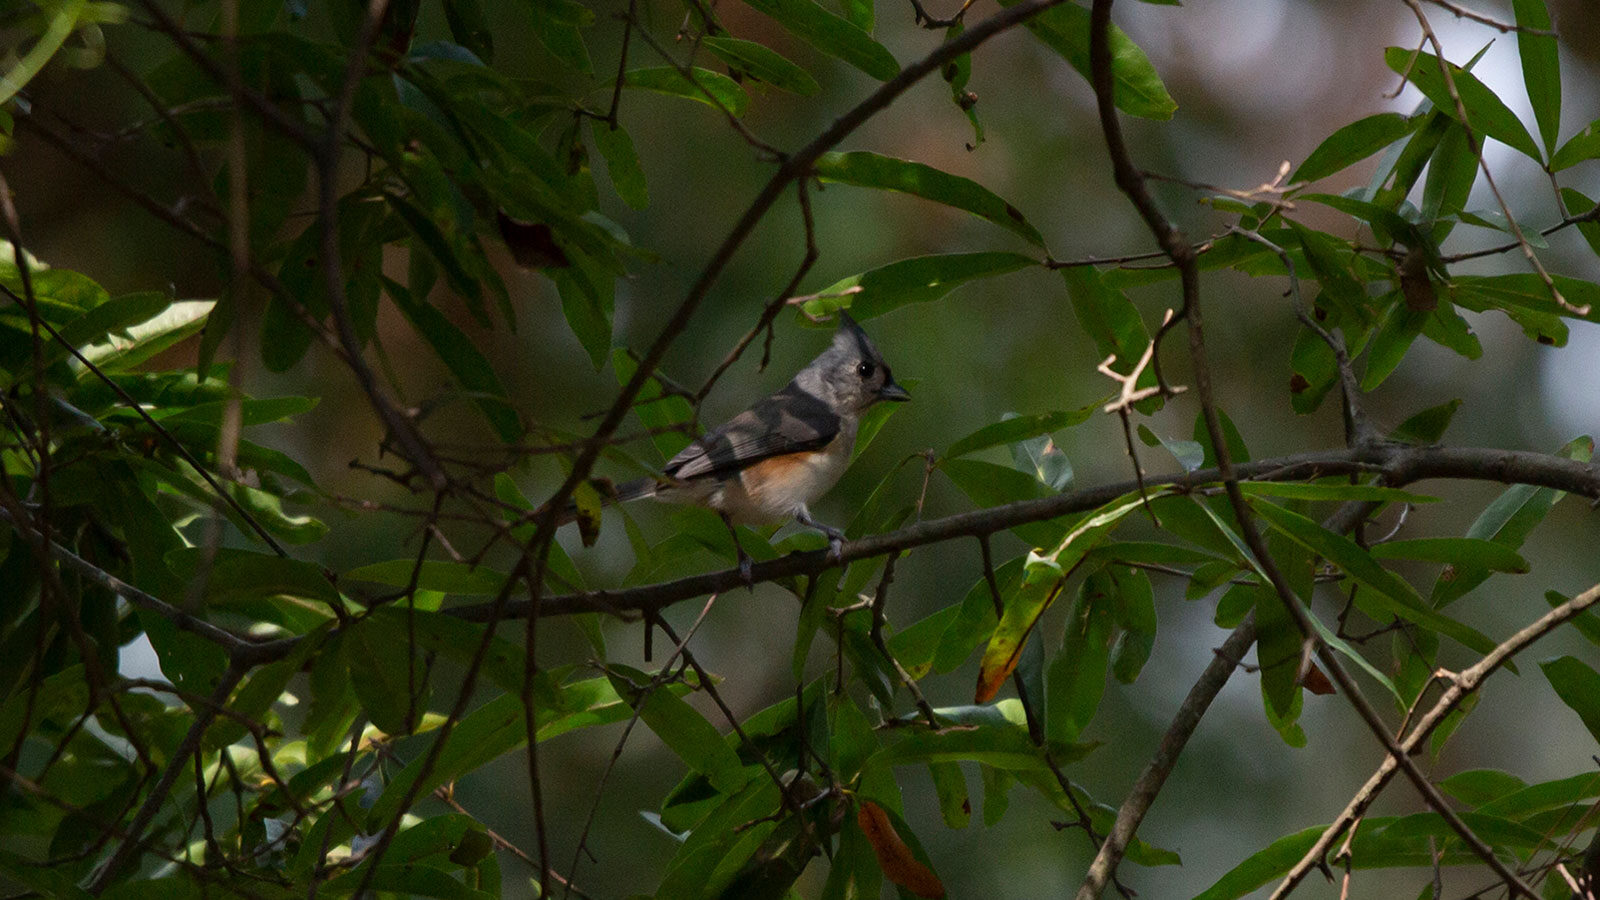 Tufted titmouse standing on a branch